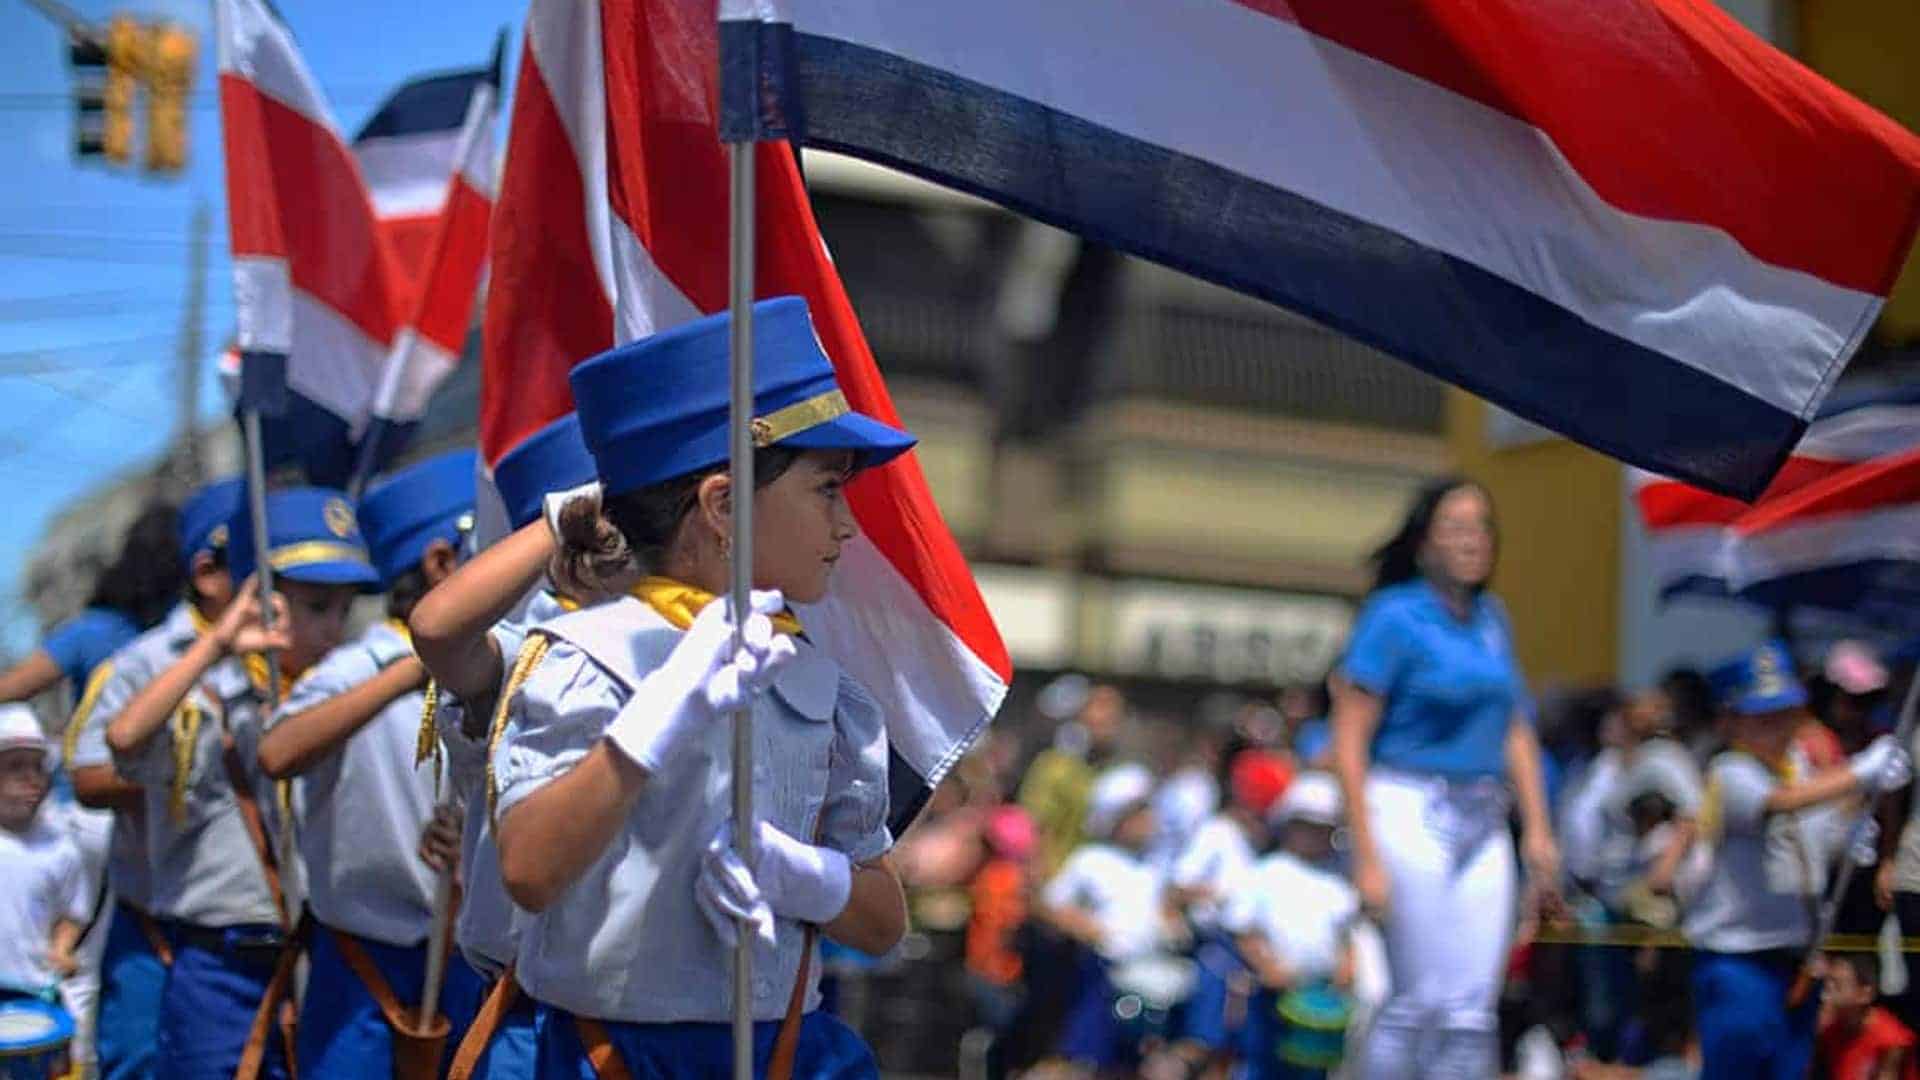 A group of children dressed in ceremonial uniforms, holding flags of Costa Rica, march in a parade. The prominent colors of the uniforms are blue and white, and the children also wear caps. The background is blurred with bystanders watching the event, emphasizing the children and flags in the foreground.